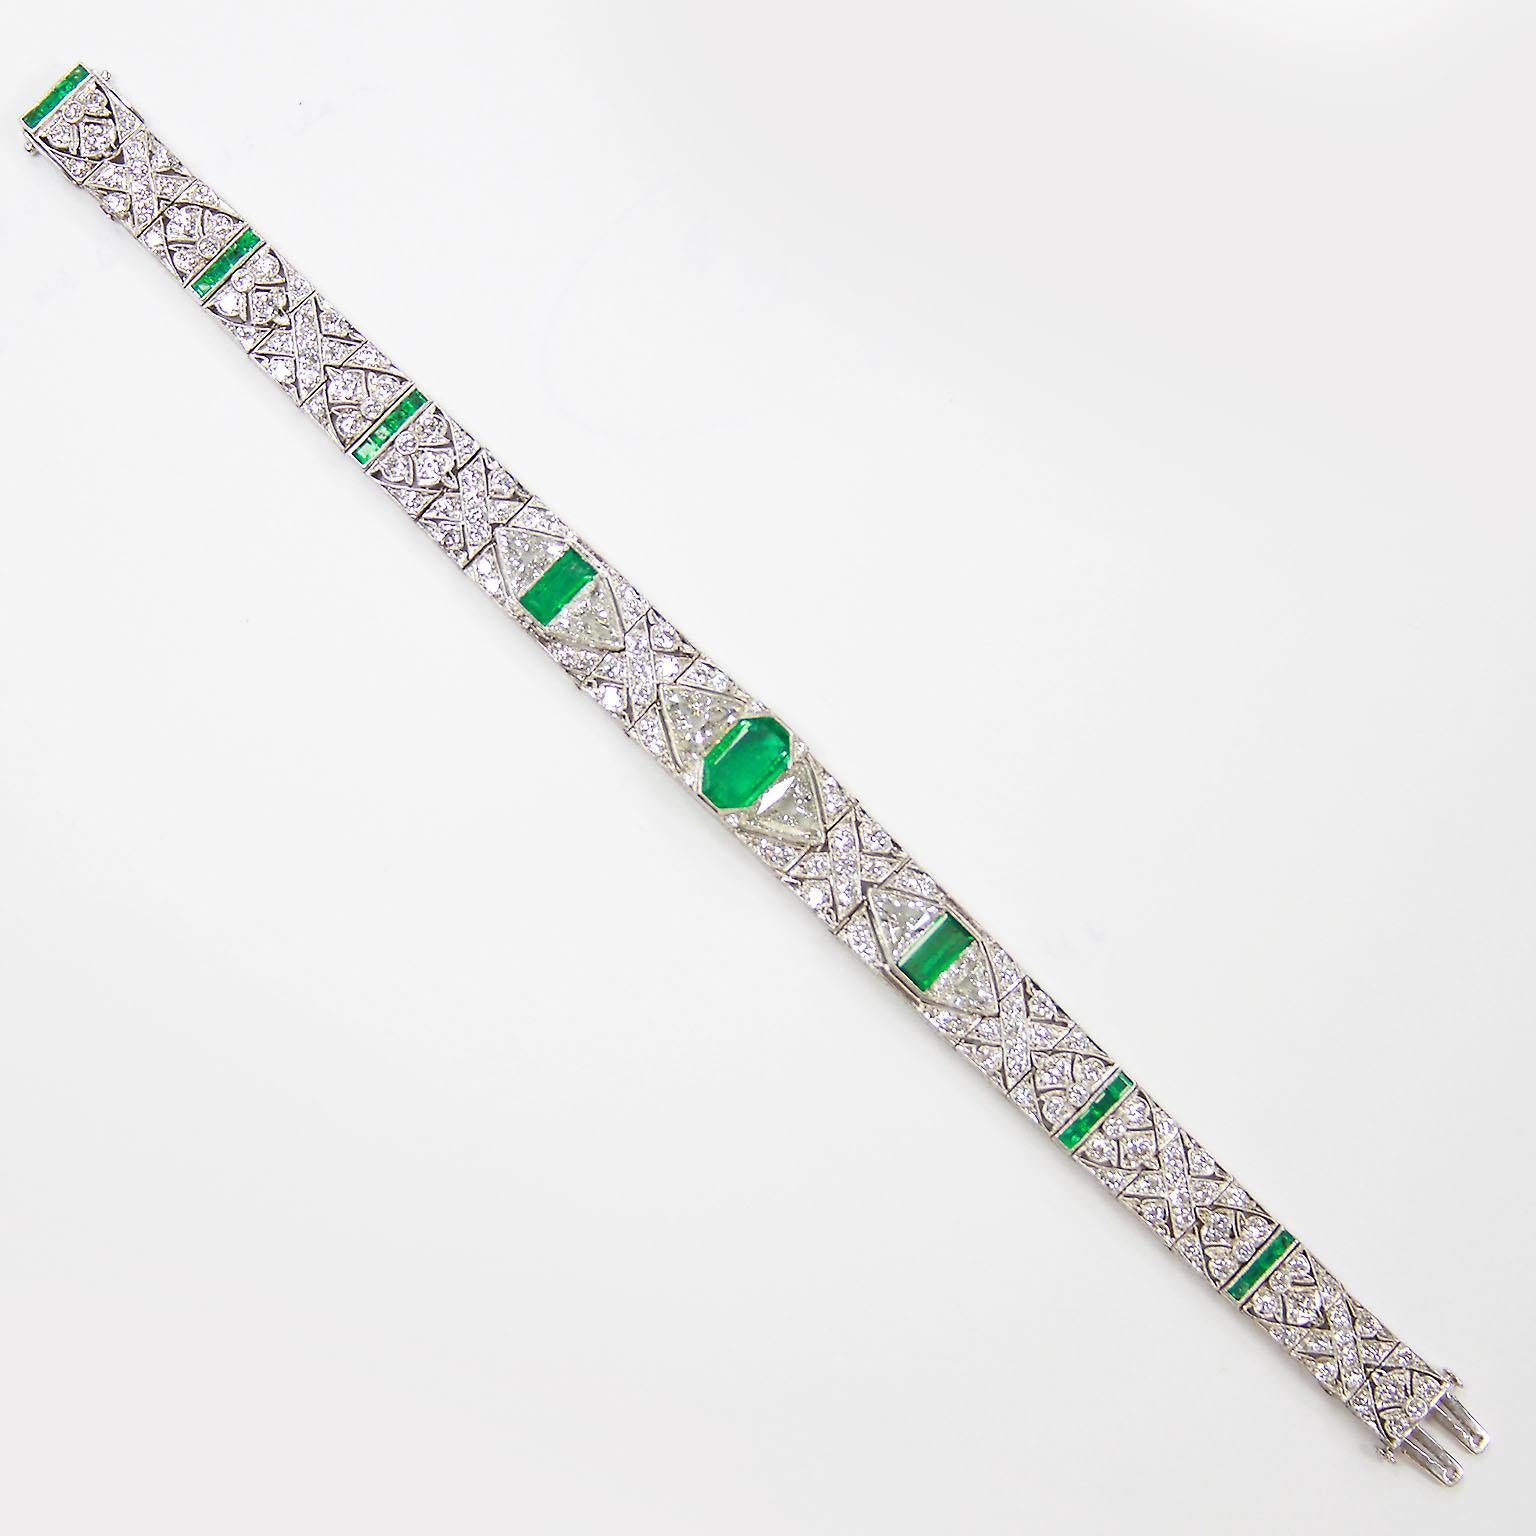 An original Art Deco period bracelet by Gattle & Co. set with three Colombian emeralds and various shapes of diamonds forming classical deco patterns. Center emerald measures 10.00 x 6.05 x 2.80 mm. Emerald is a bright transparent green. Other two